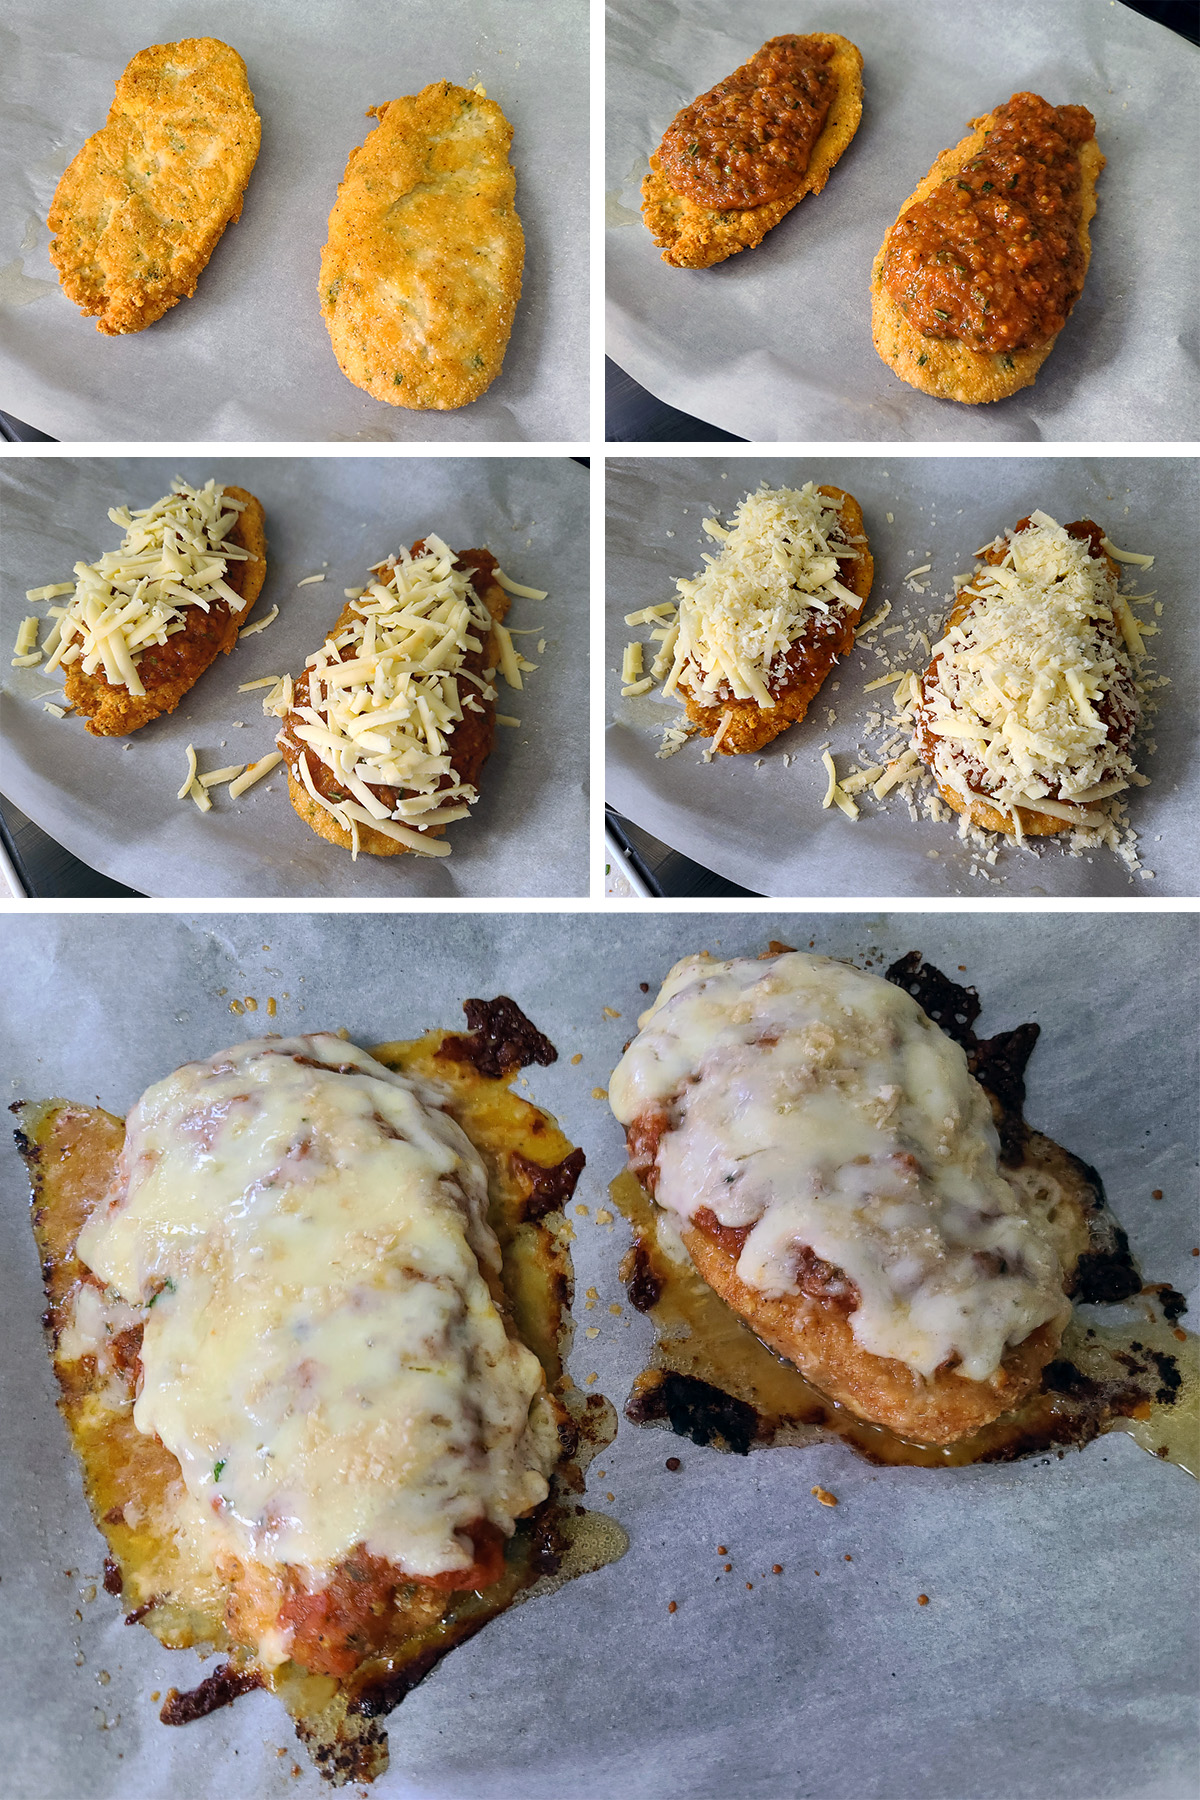 A 5 part image showing the fried chicken breasts being turned into chicken parmesan on a baking sheet.